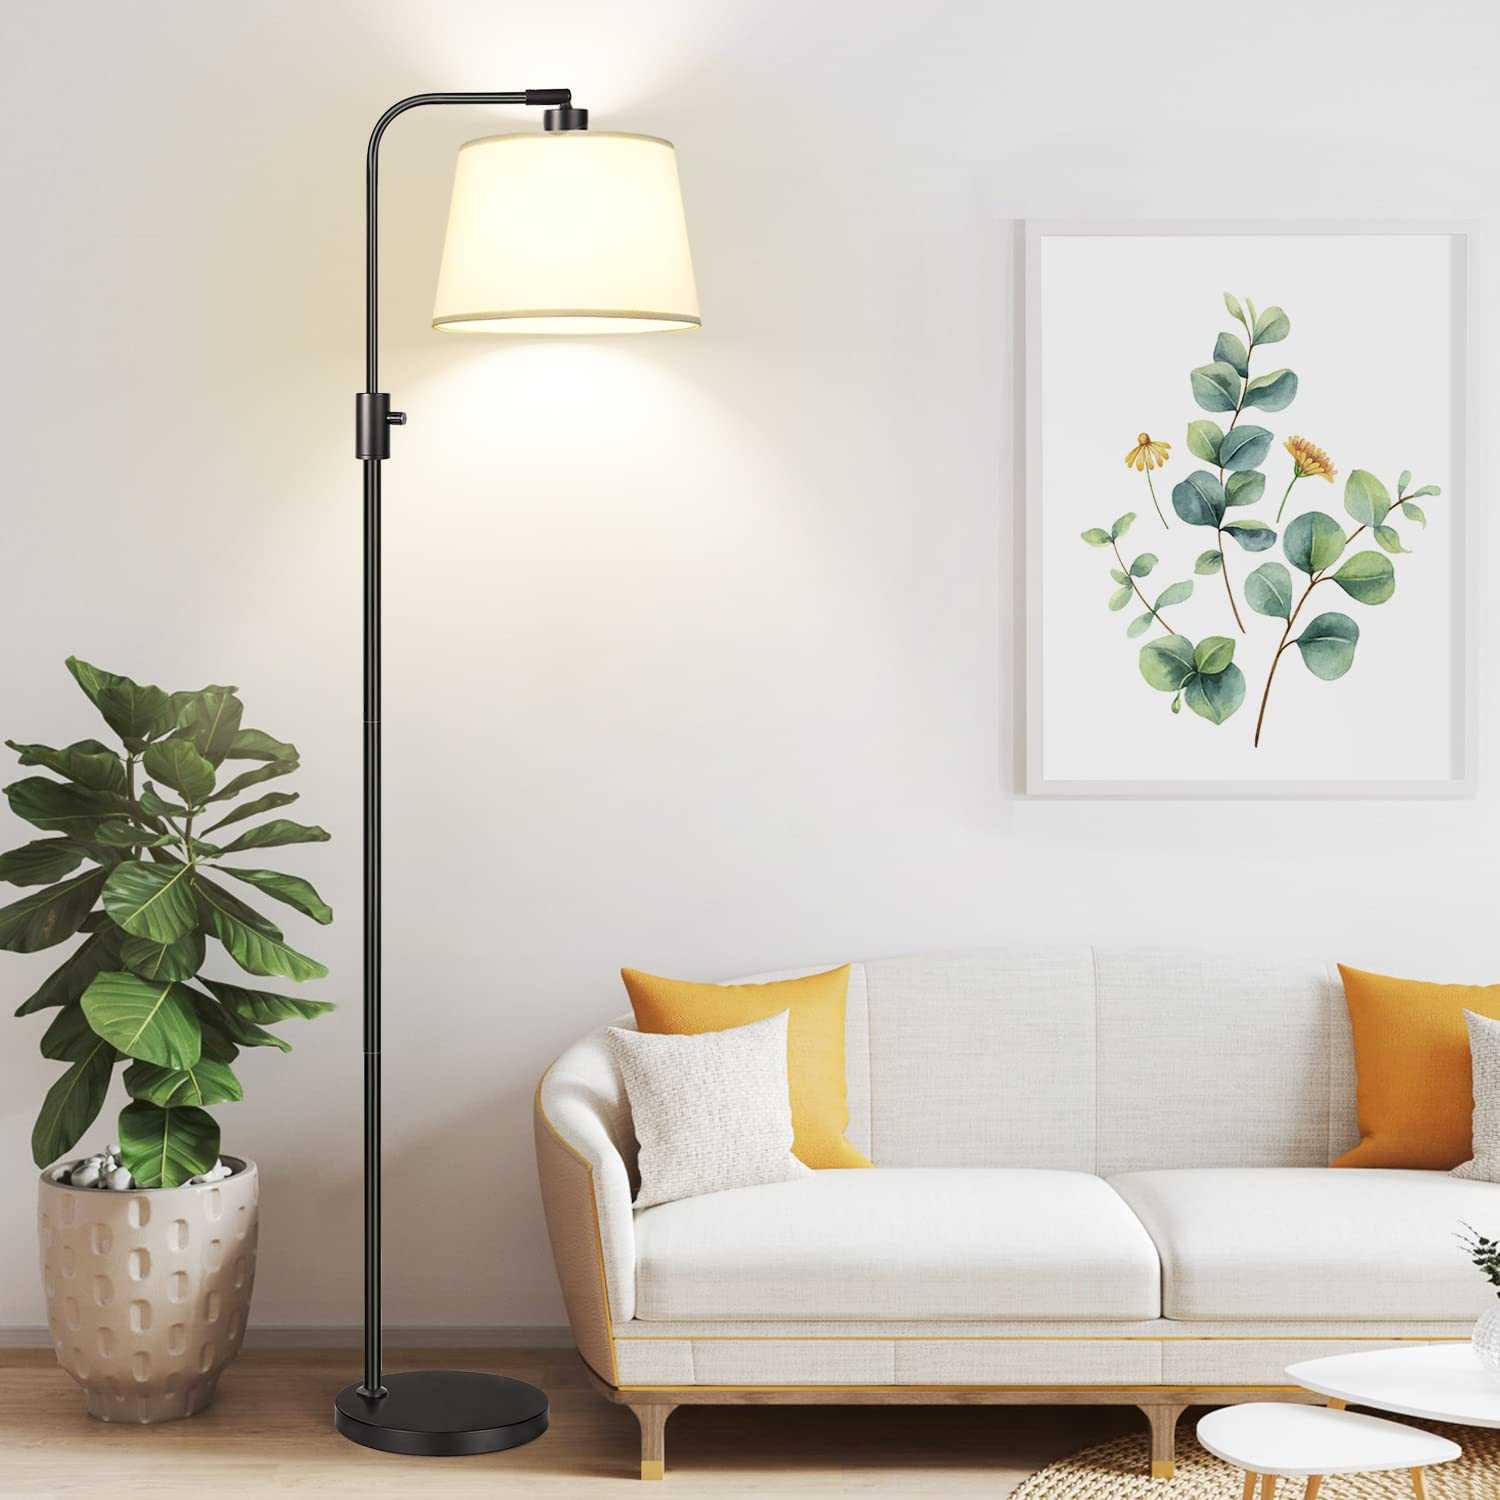 How to choose Lamps for the Living Room